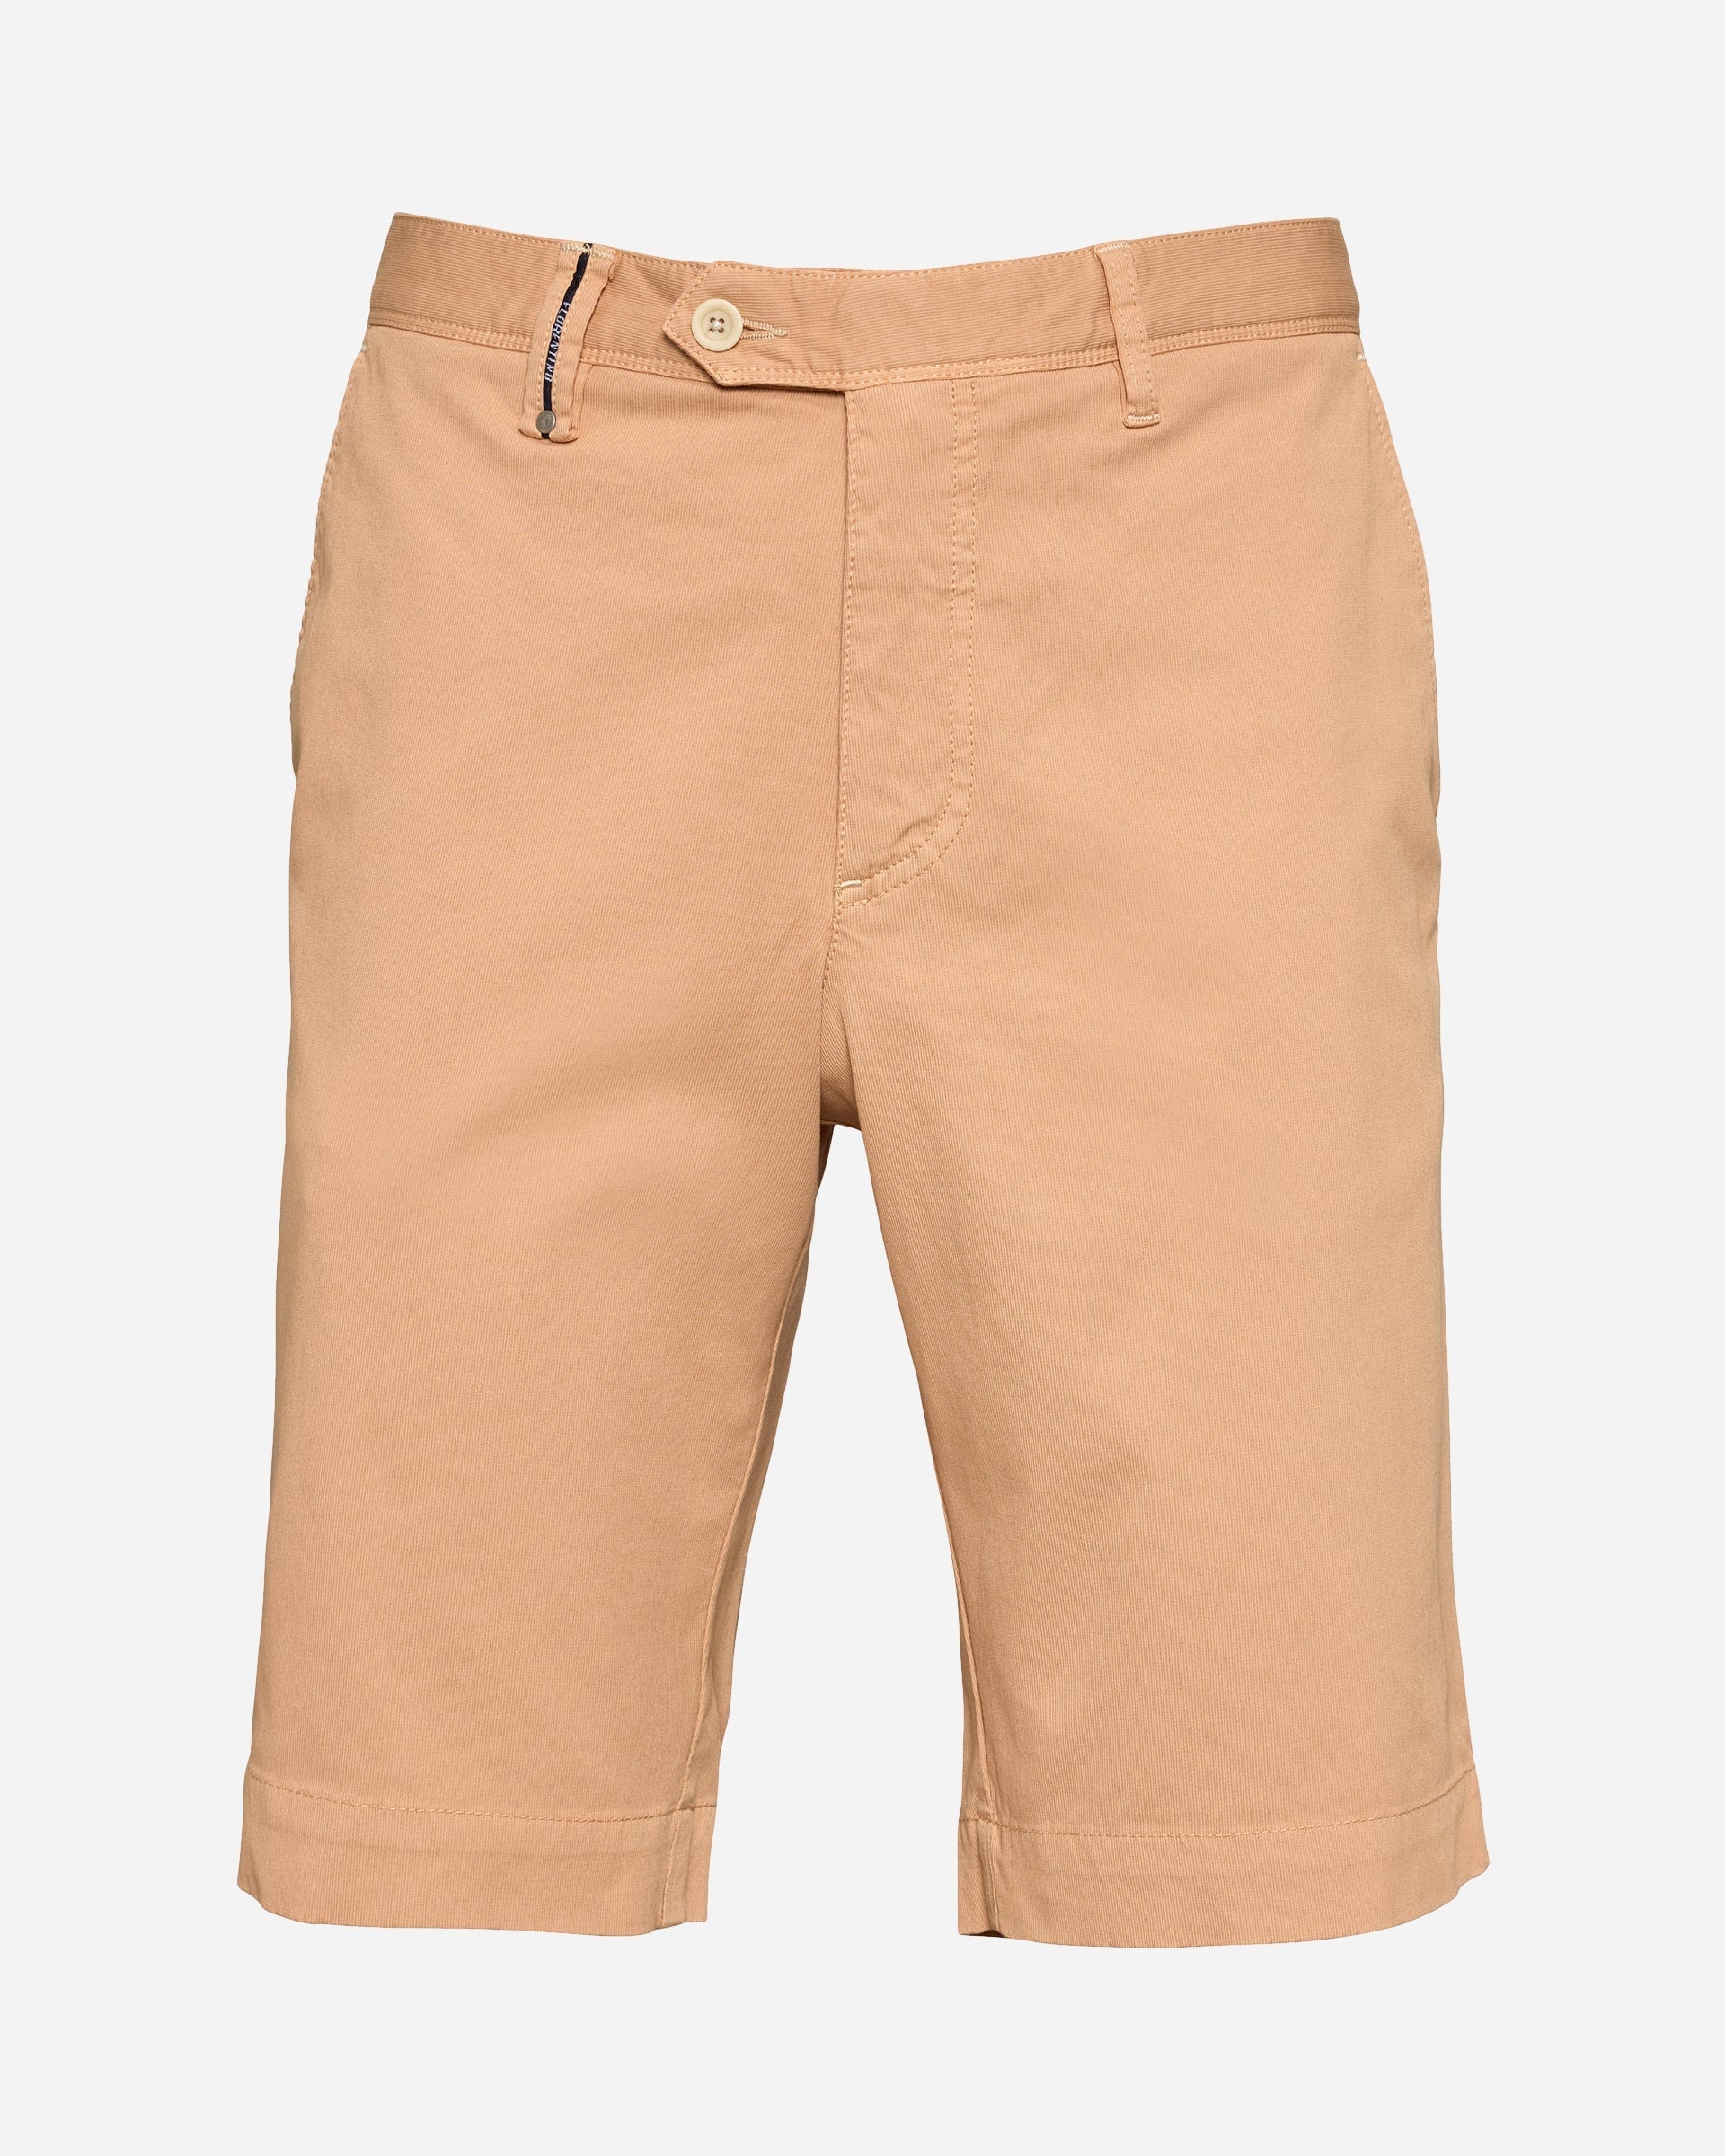 Tailored Twill Short - Men's Shorts at Menzclub